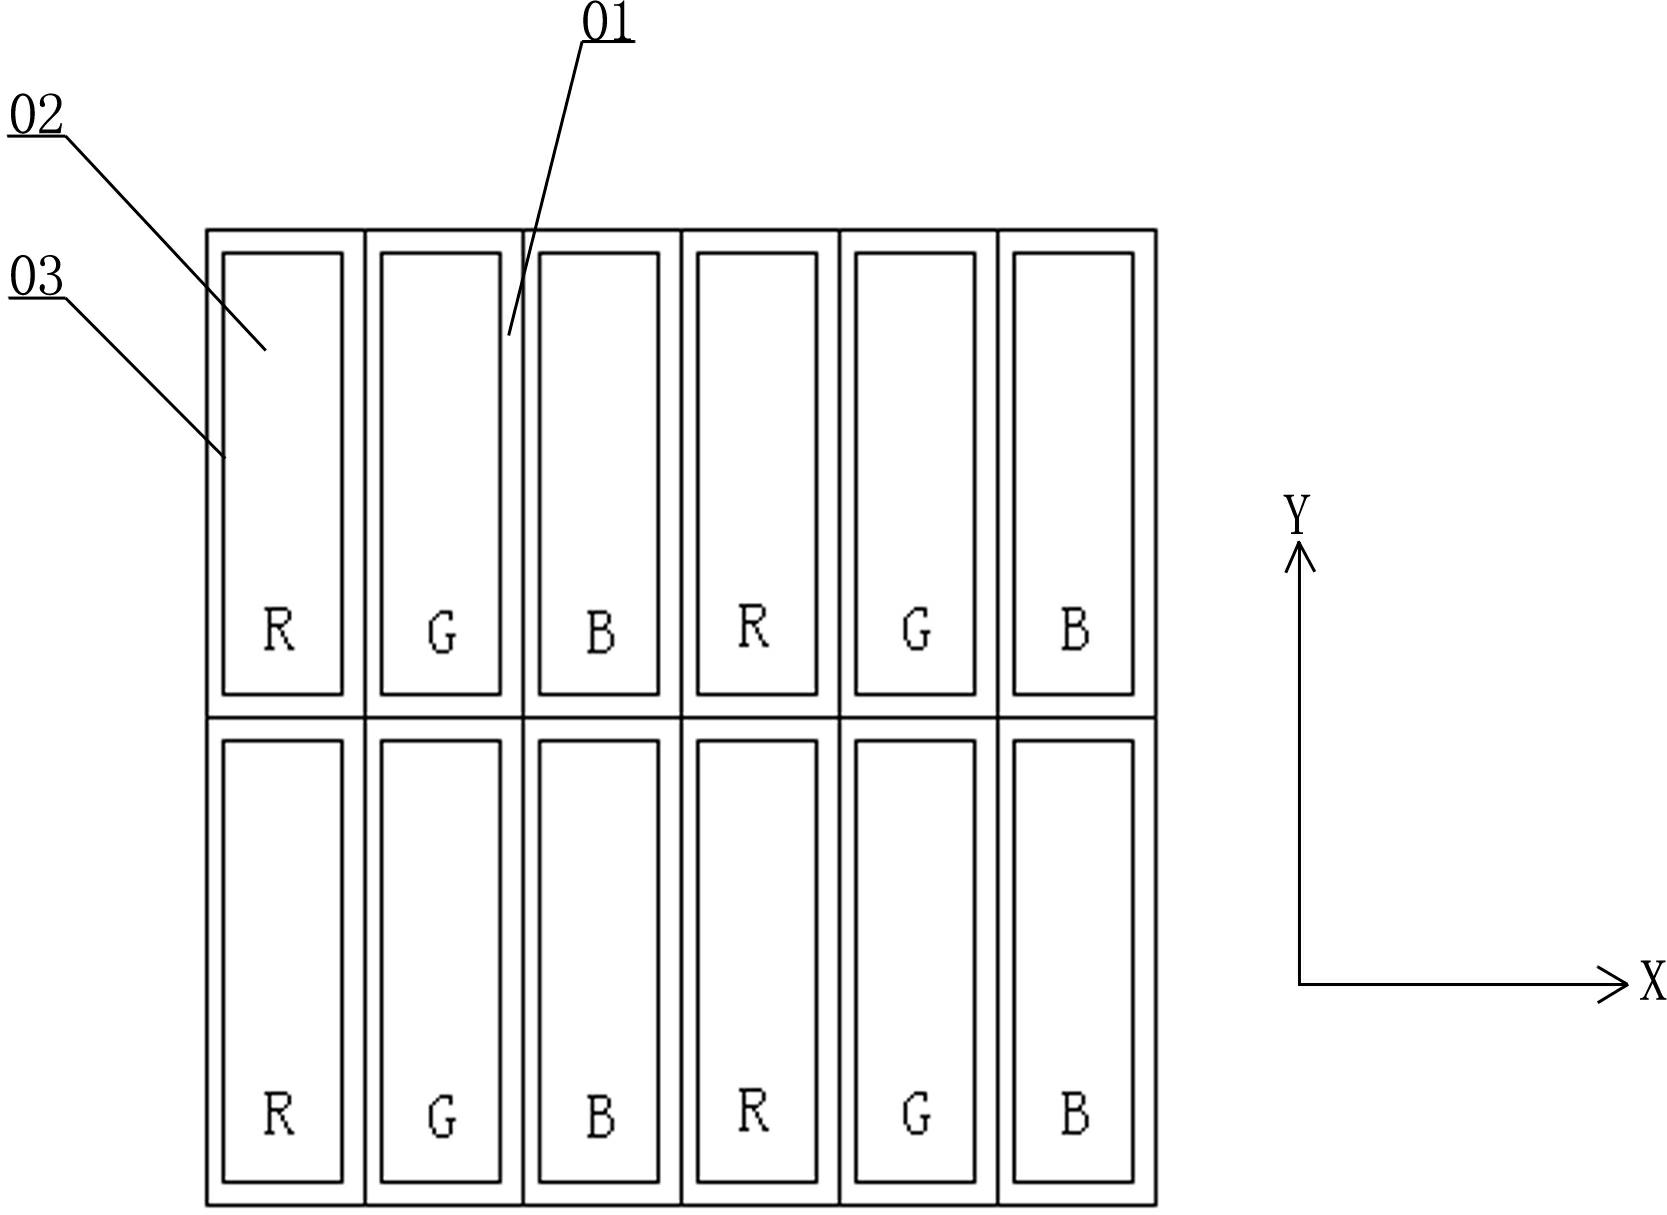 Electrode bridging connection structure for inhibiting picture interference of capacitance type touch screen